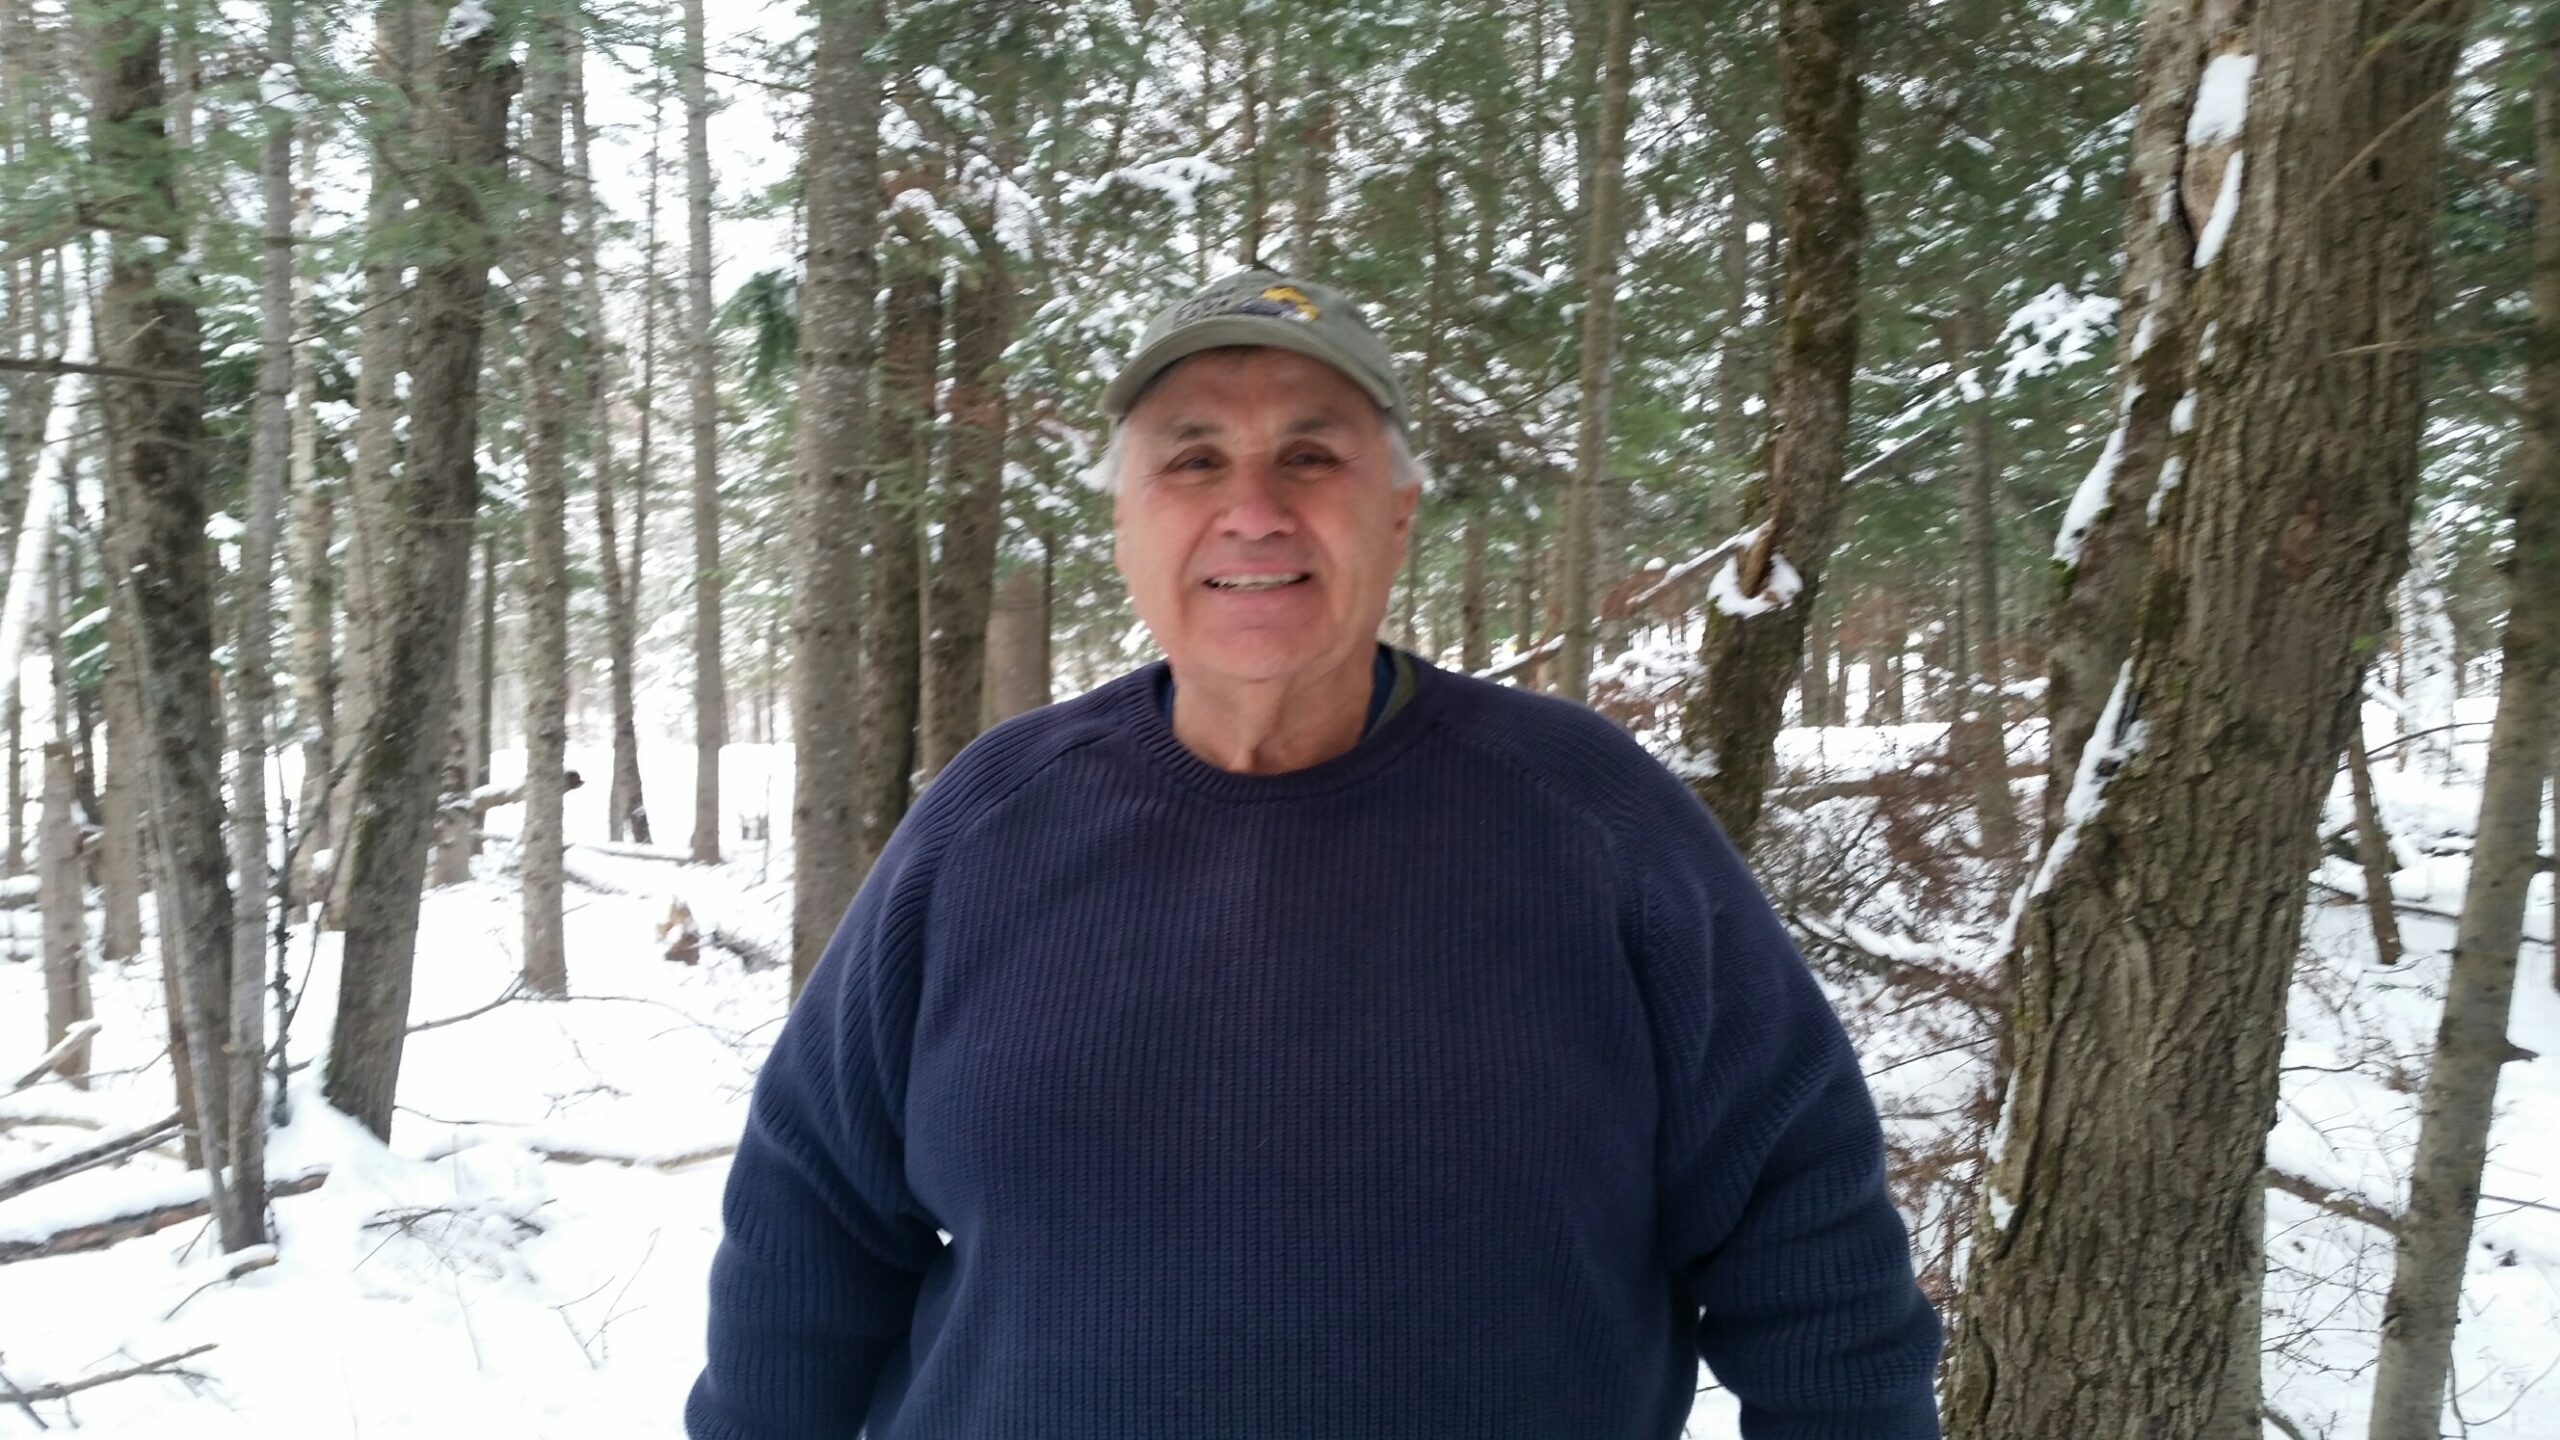 <strong><meta charset="utf-8"><strong>Mike St. Peter, Certified Logging Professionals</strong></strong>